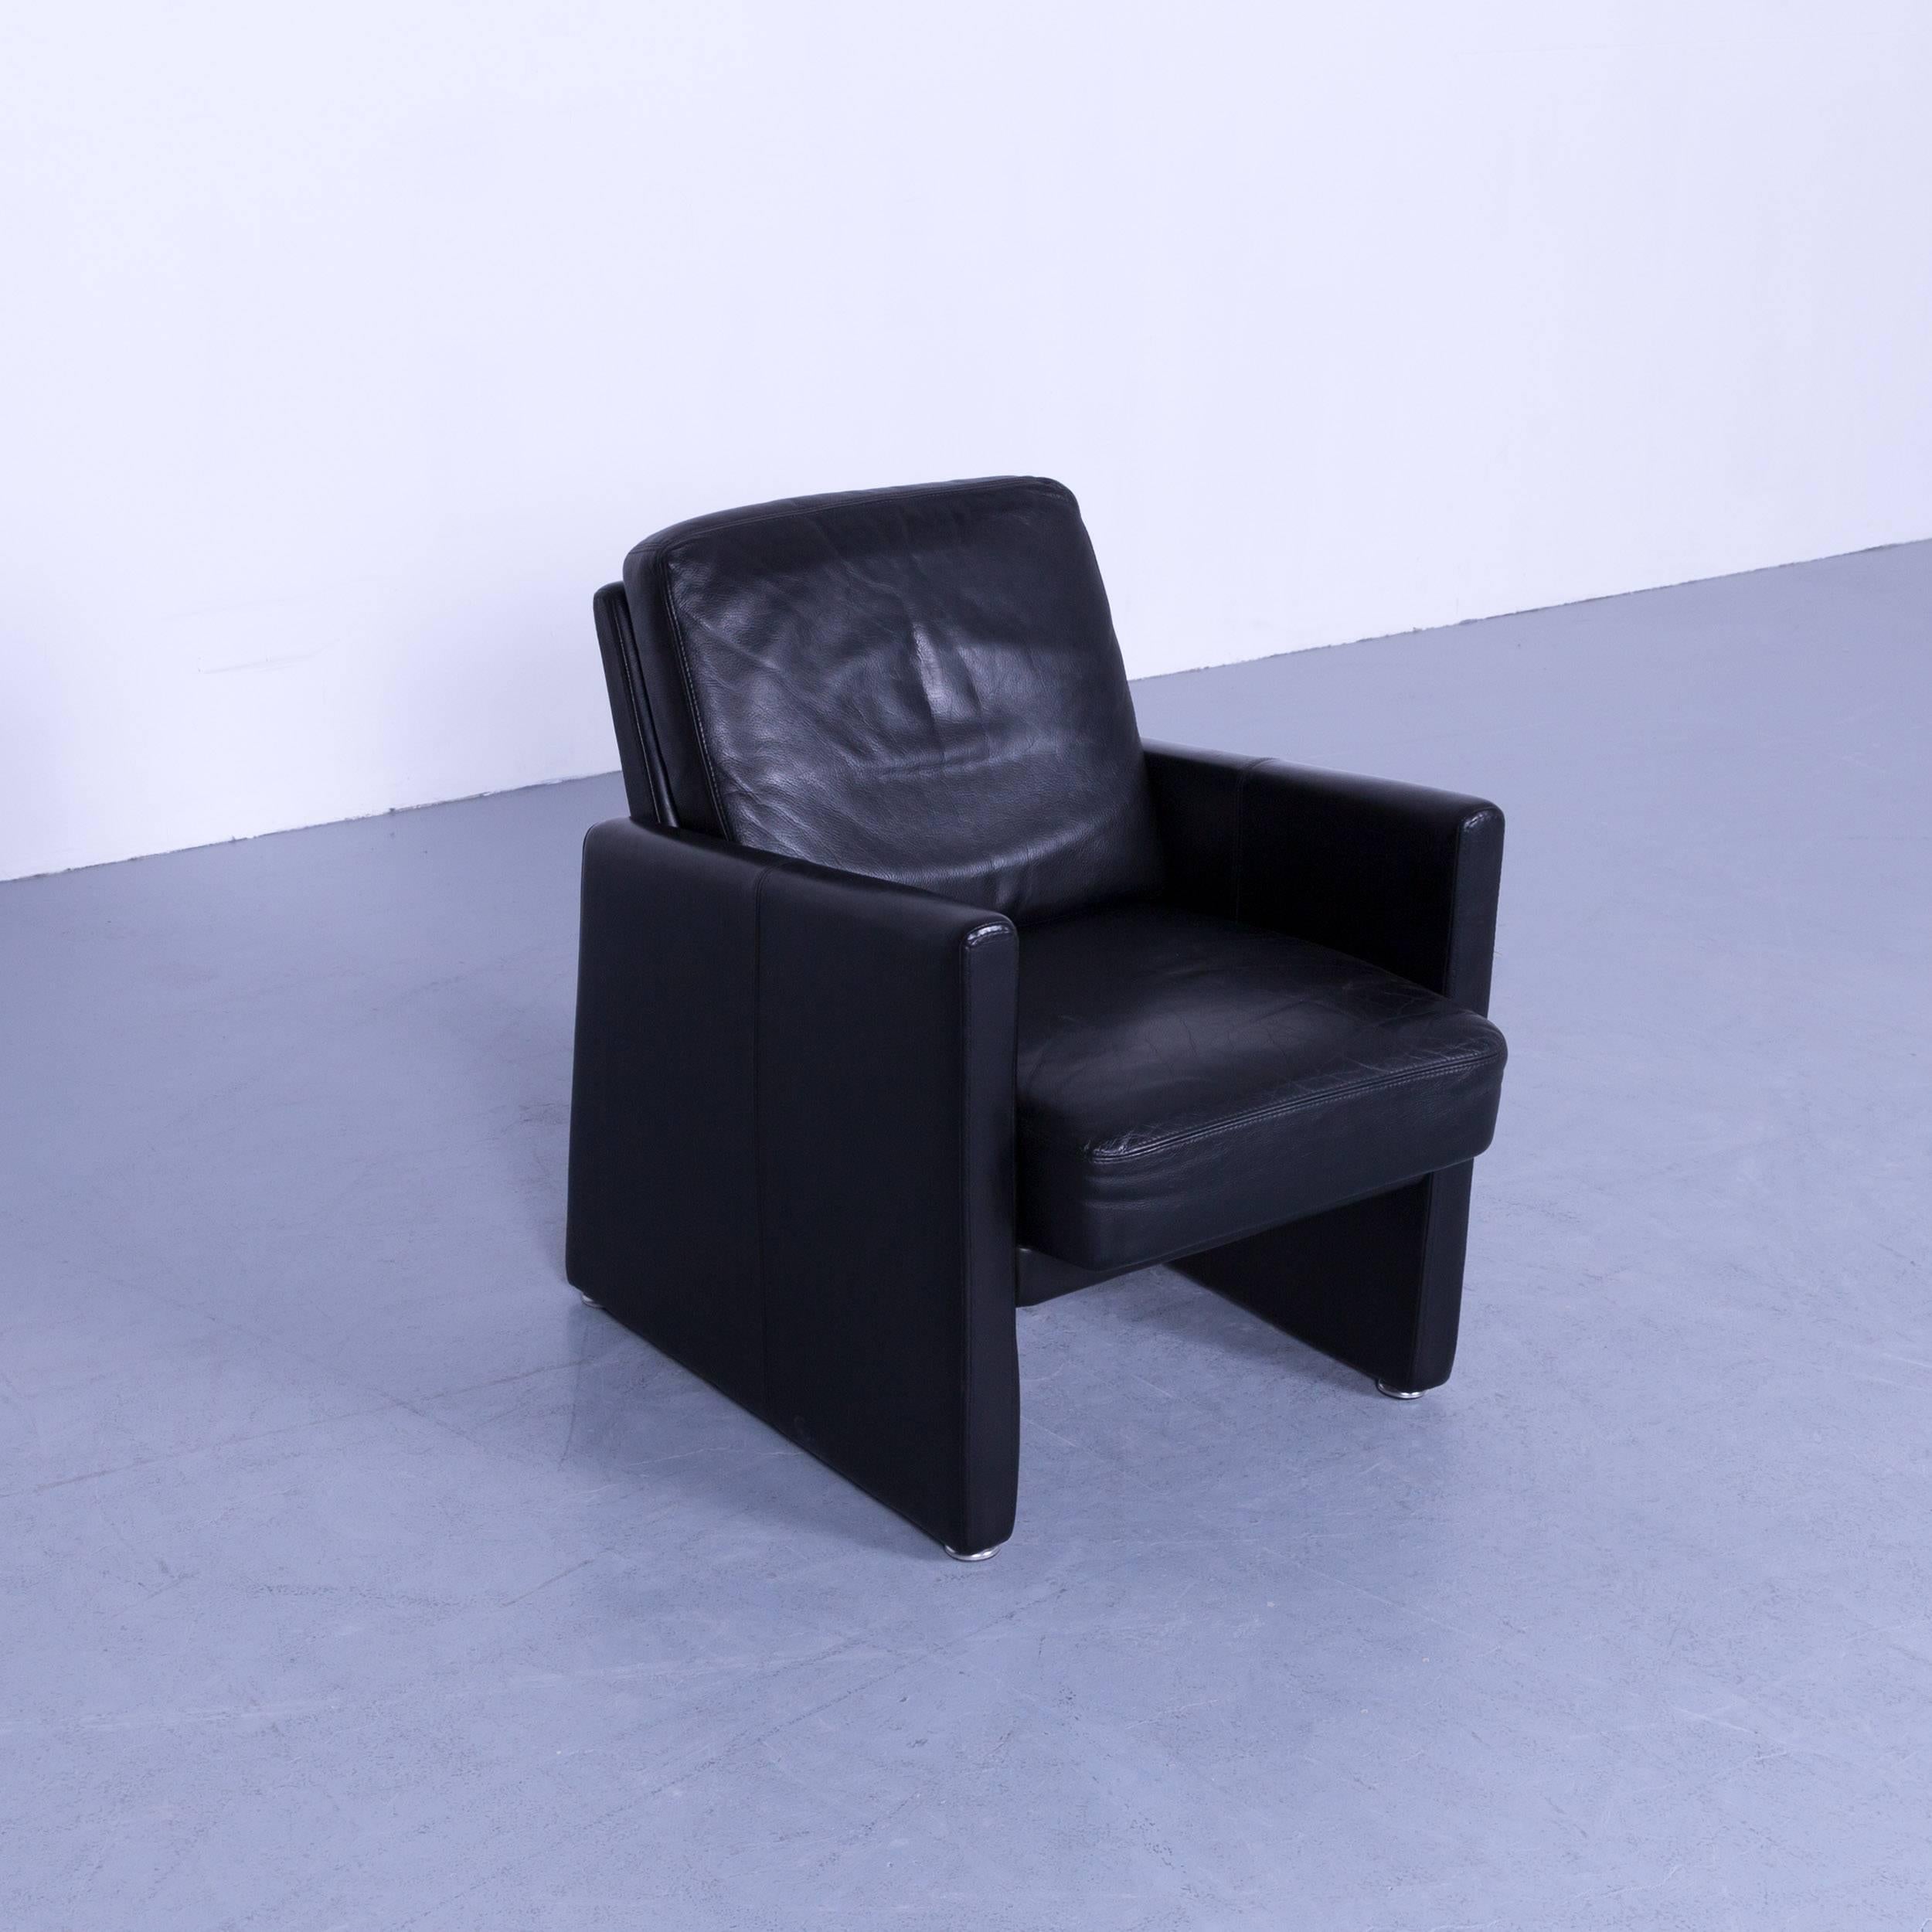 Modern Brühl & Sippold Designer Armchair Black Leather Simple Form Made in Germany